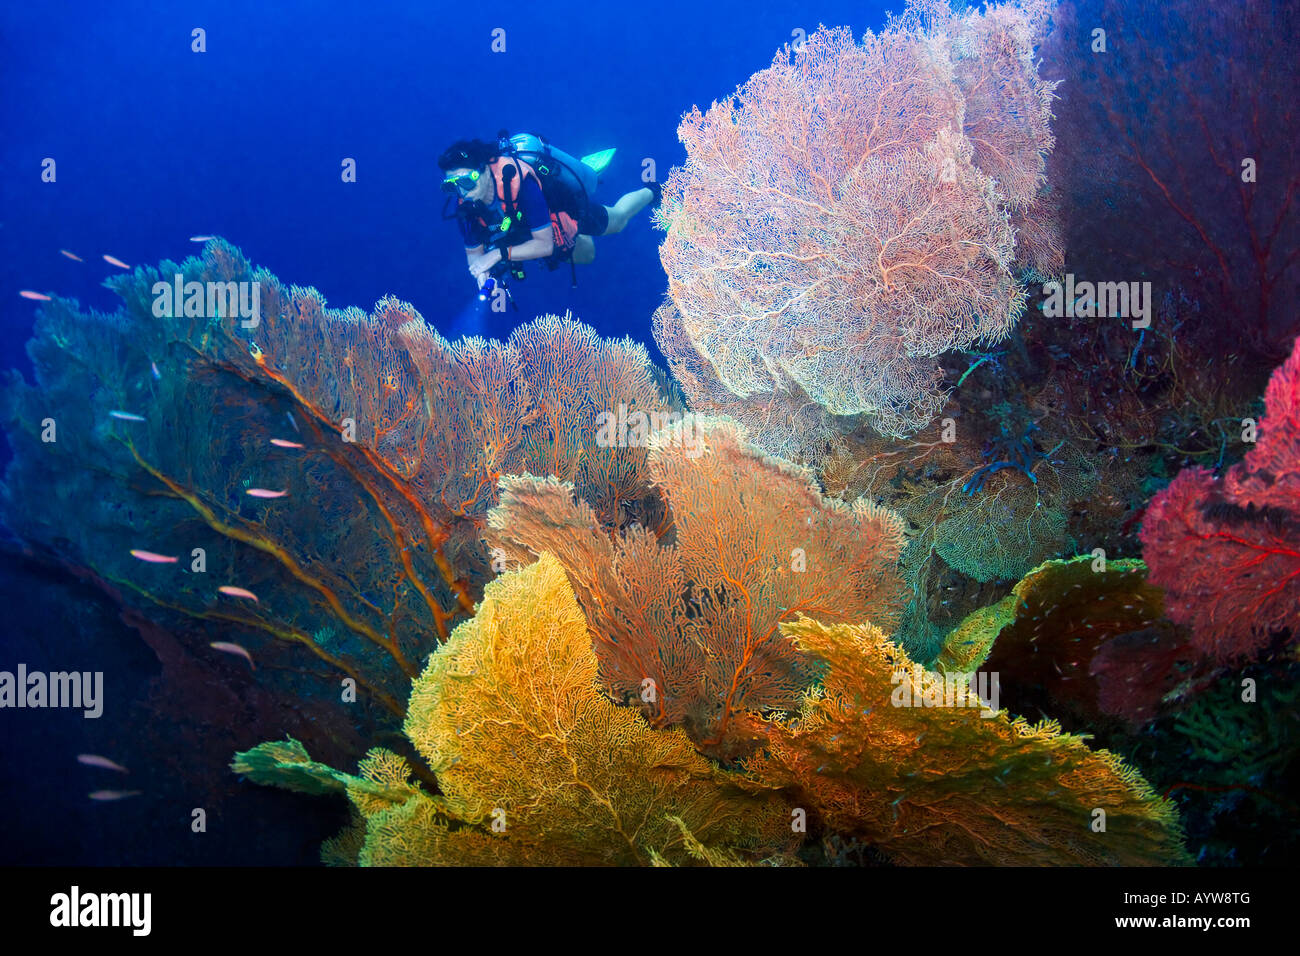 A scuba diver swims between giant Gorgonian Fan Corals at Wickham Island New Georgia, part of the Solomon Islands. Stock Photo